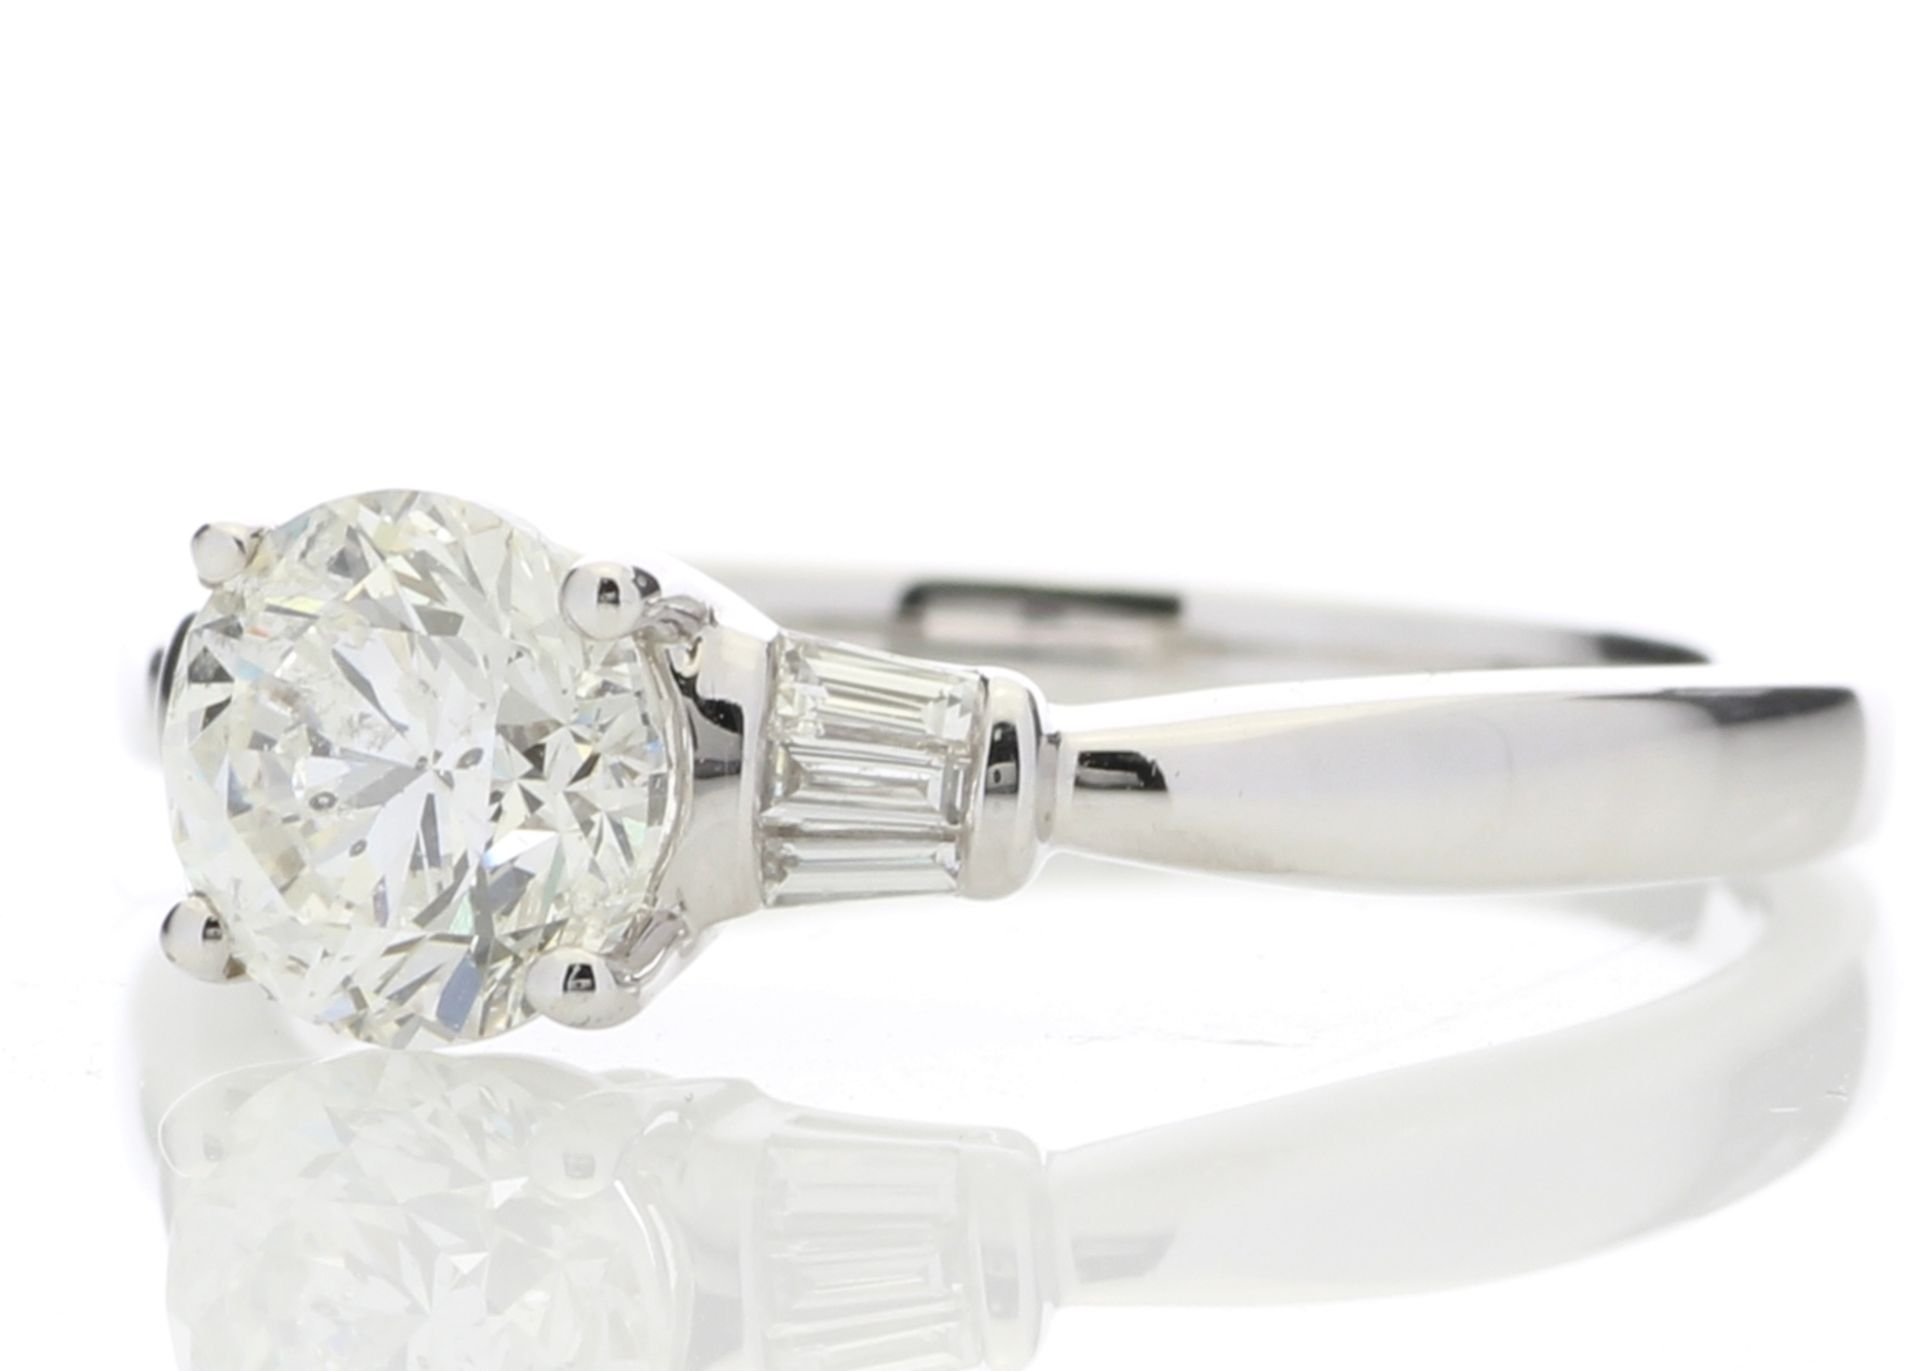 18ct White Gold Single Stone Diamond Ring With Baguette (1.02) 1.15 Carats - Valued by GIE £37,300. - Image 2 of 5